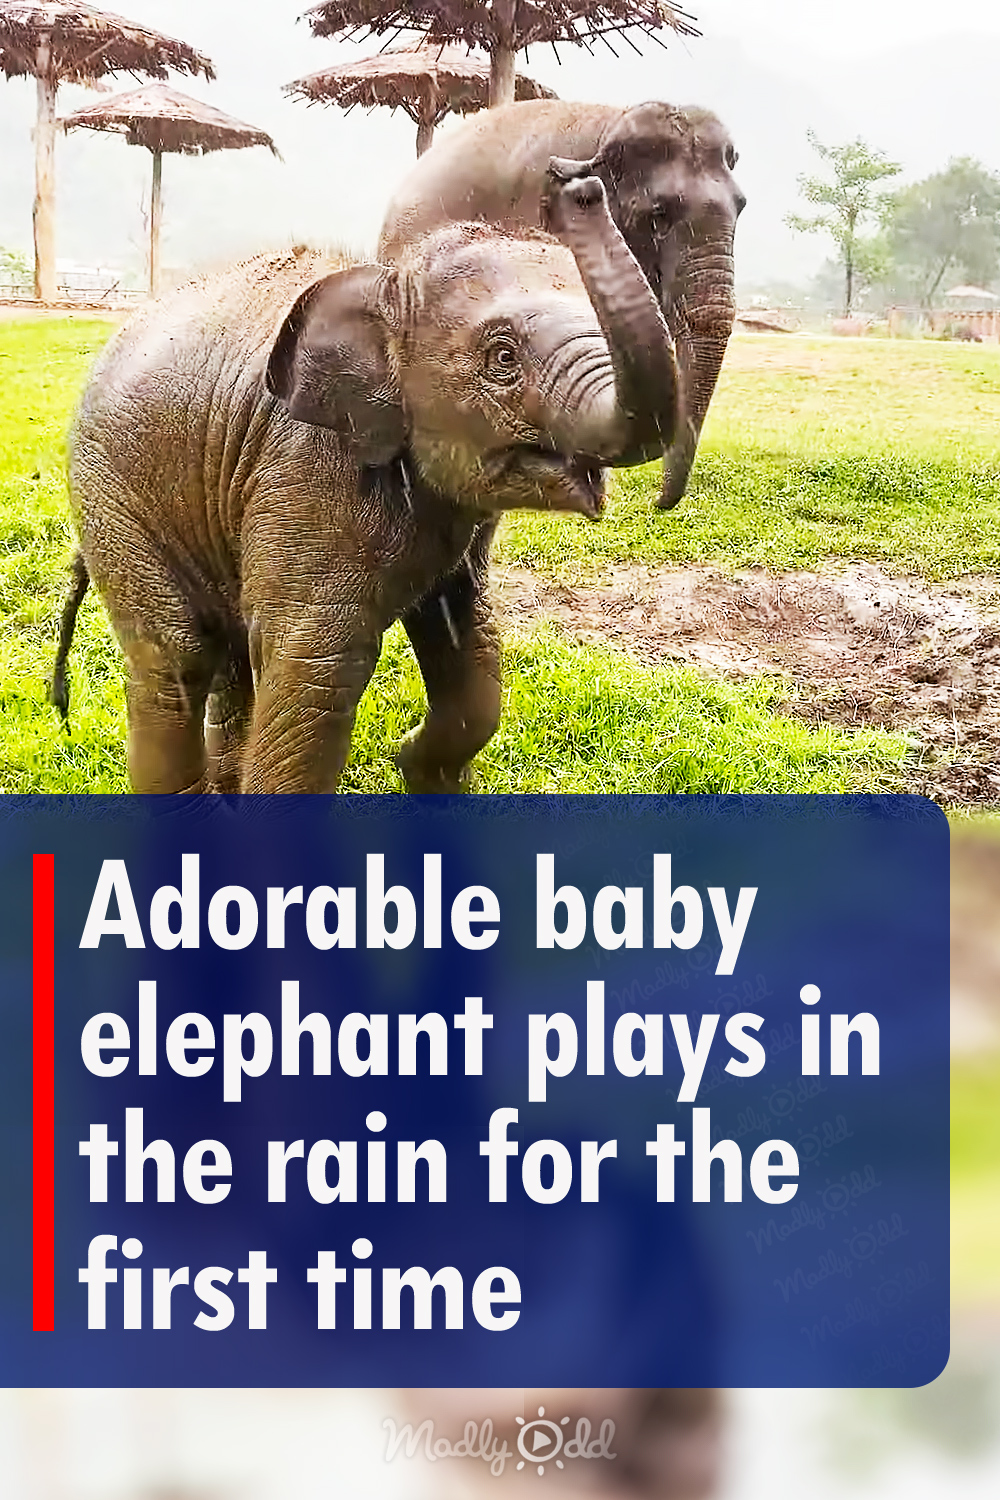 Adorable baby elephant plays in the rain for the first time